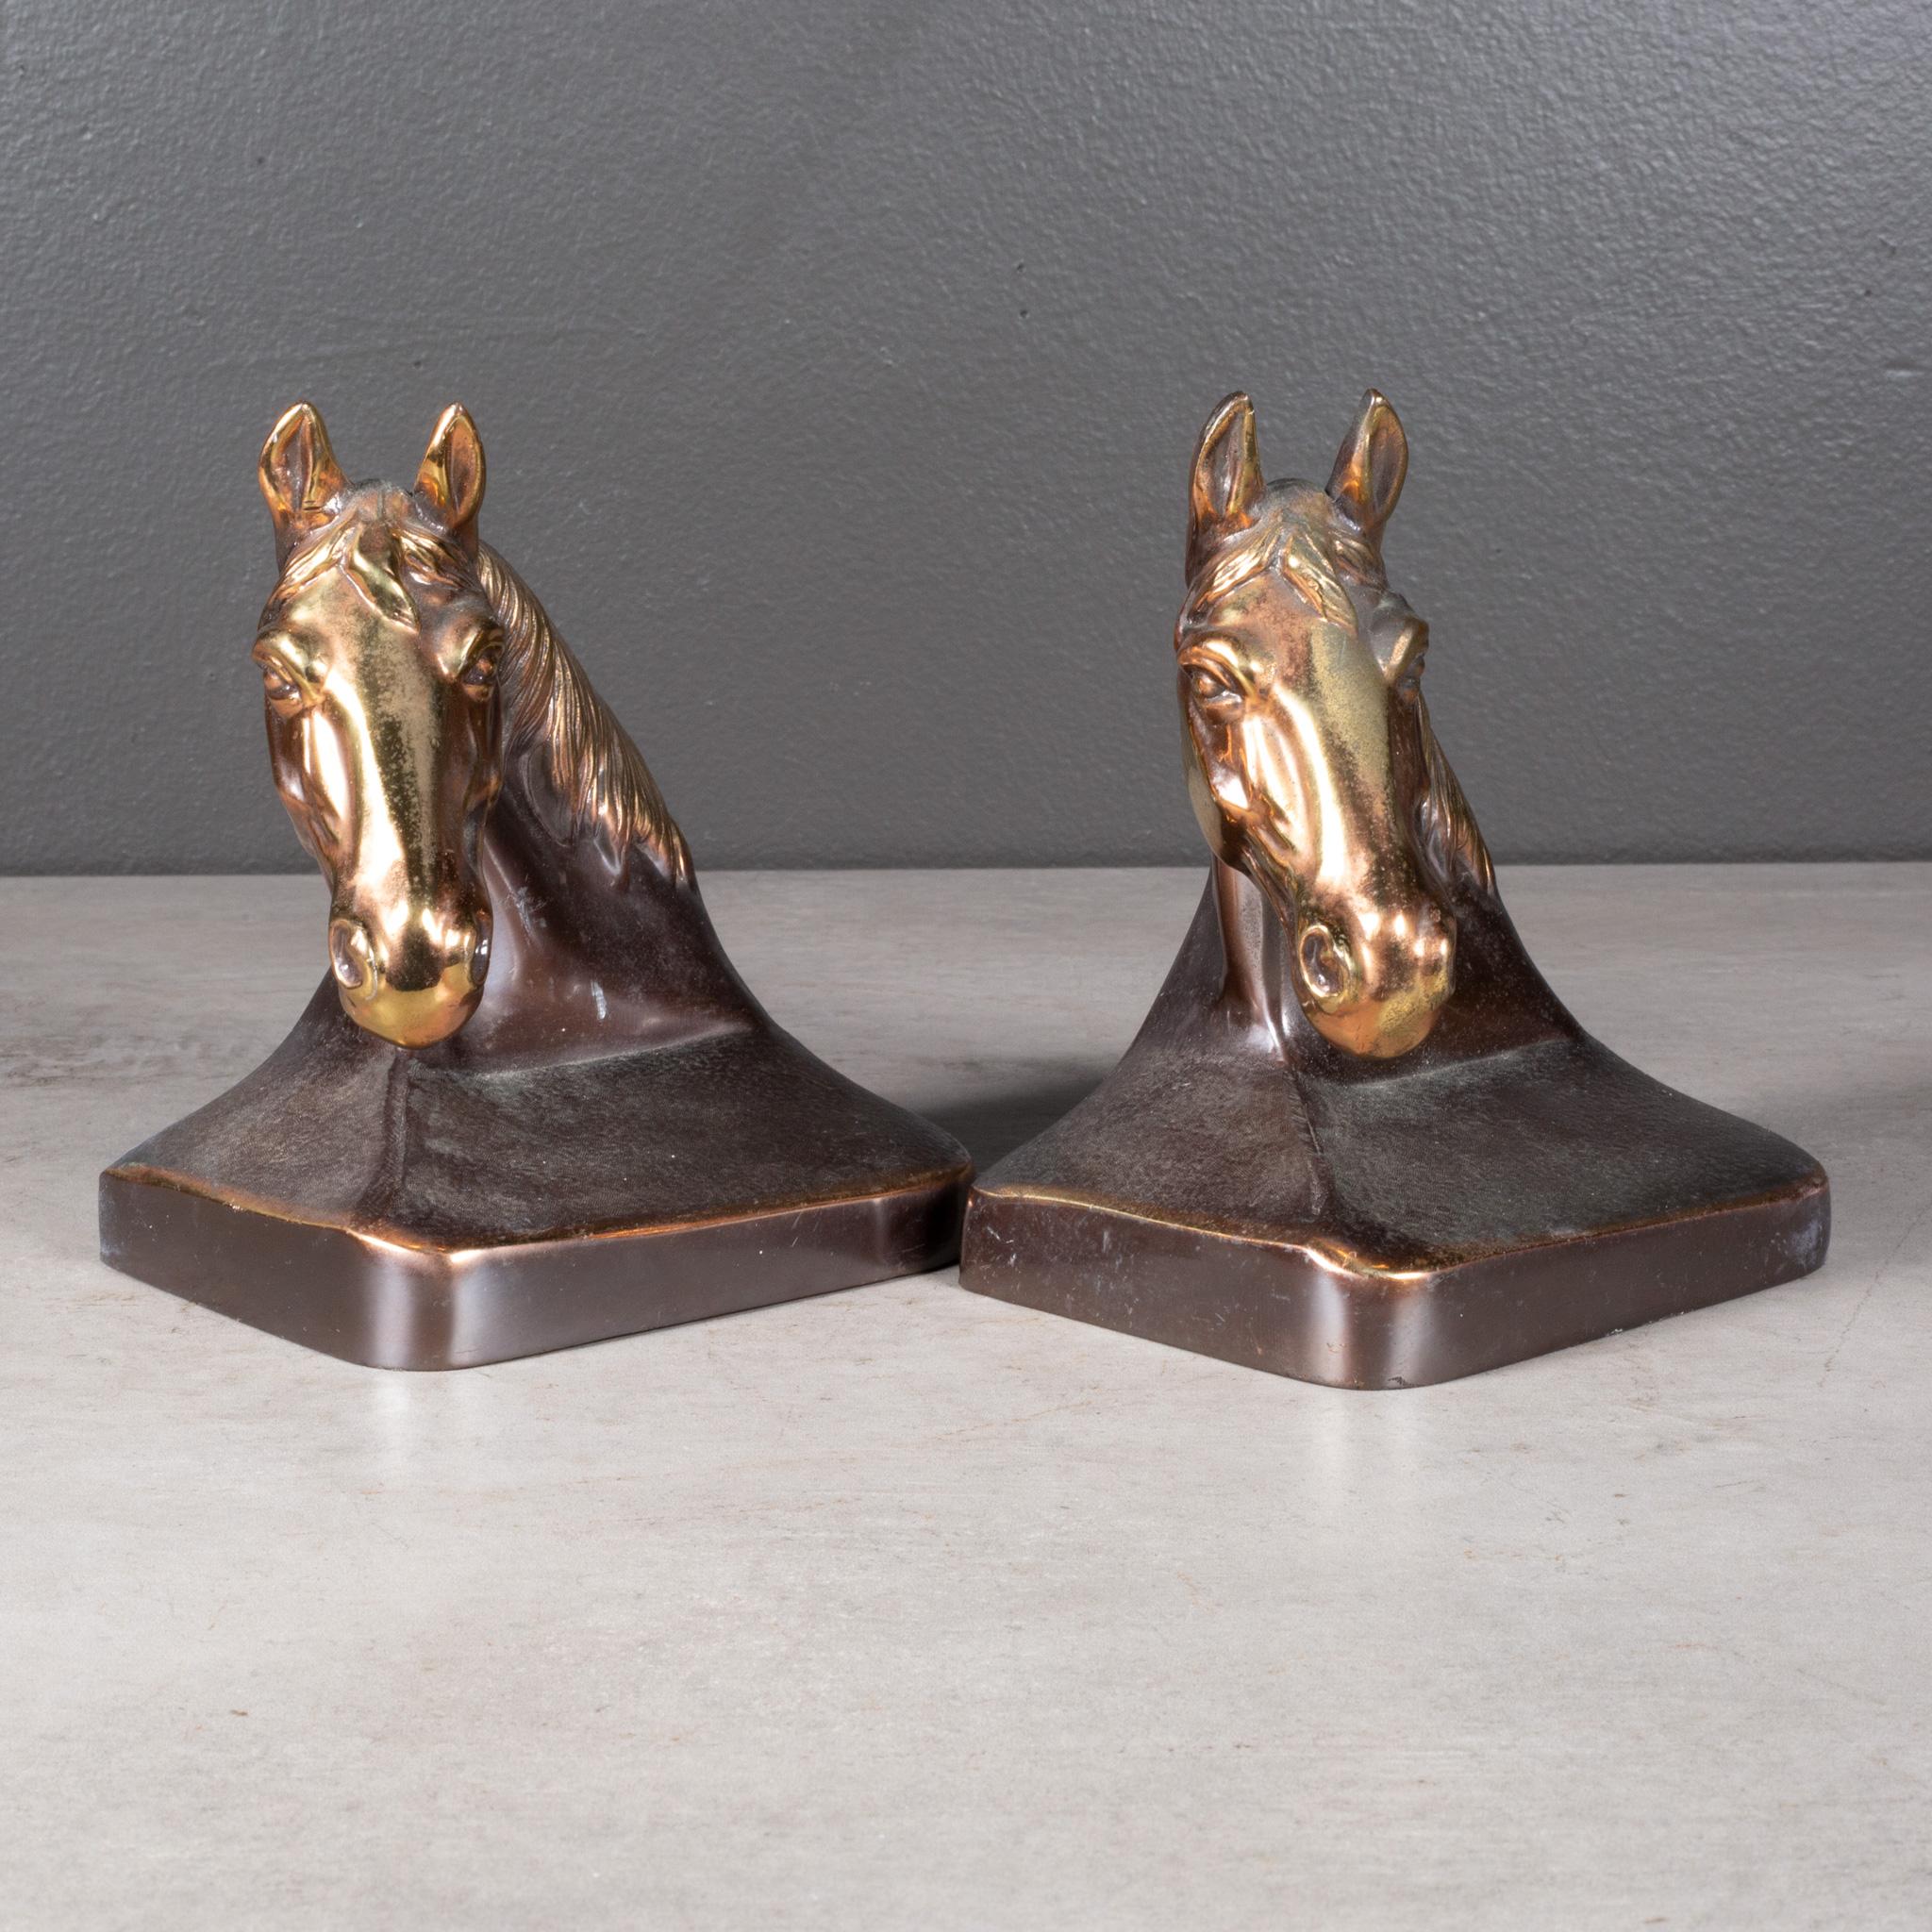 ABOUT

A vintage pair of bronze plated horse bookends with embossed stamp 